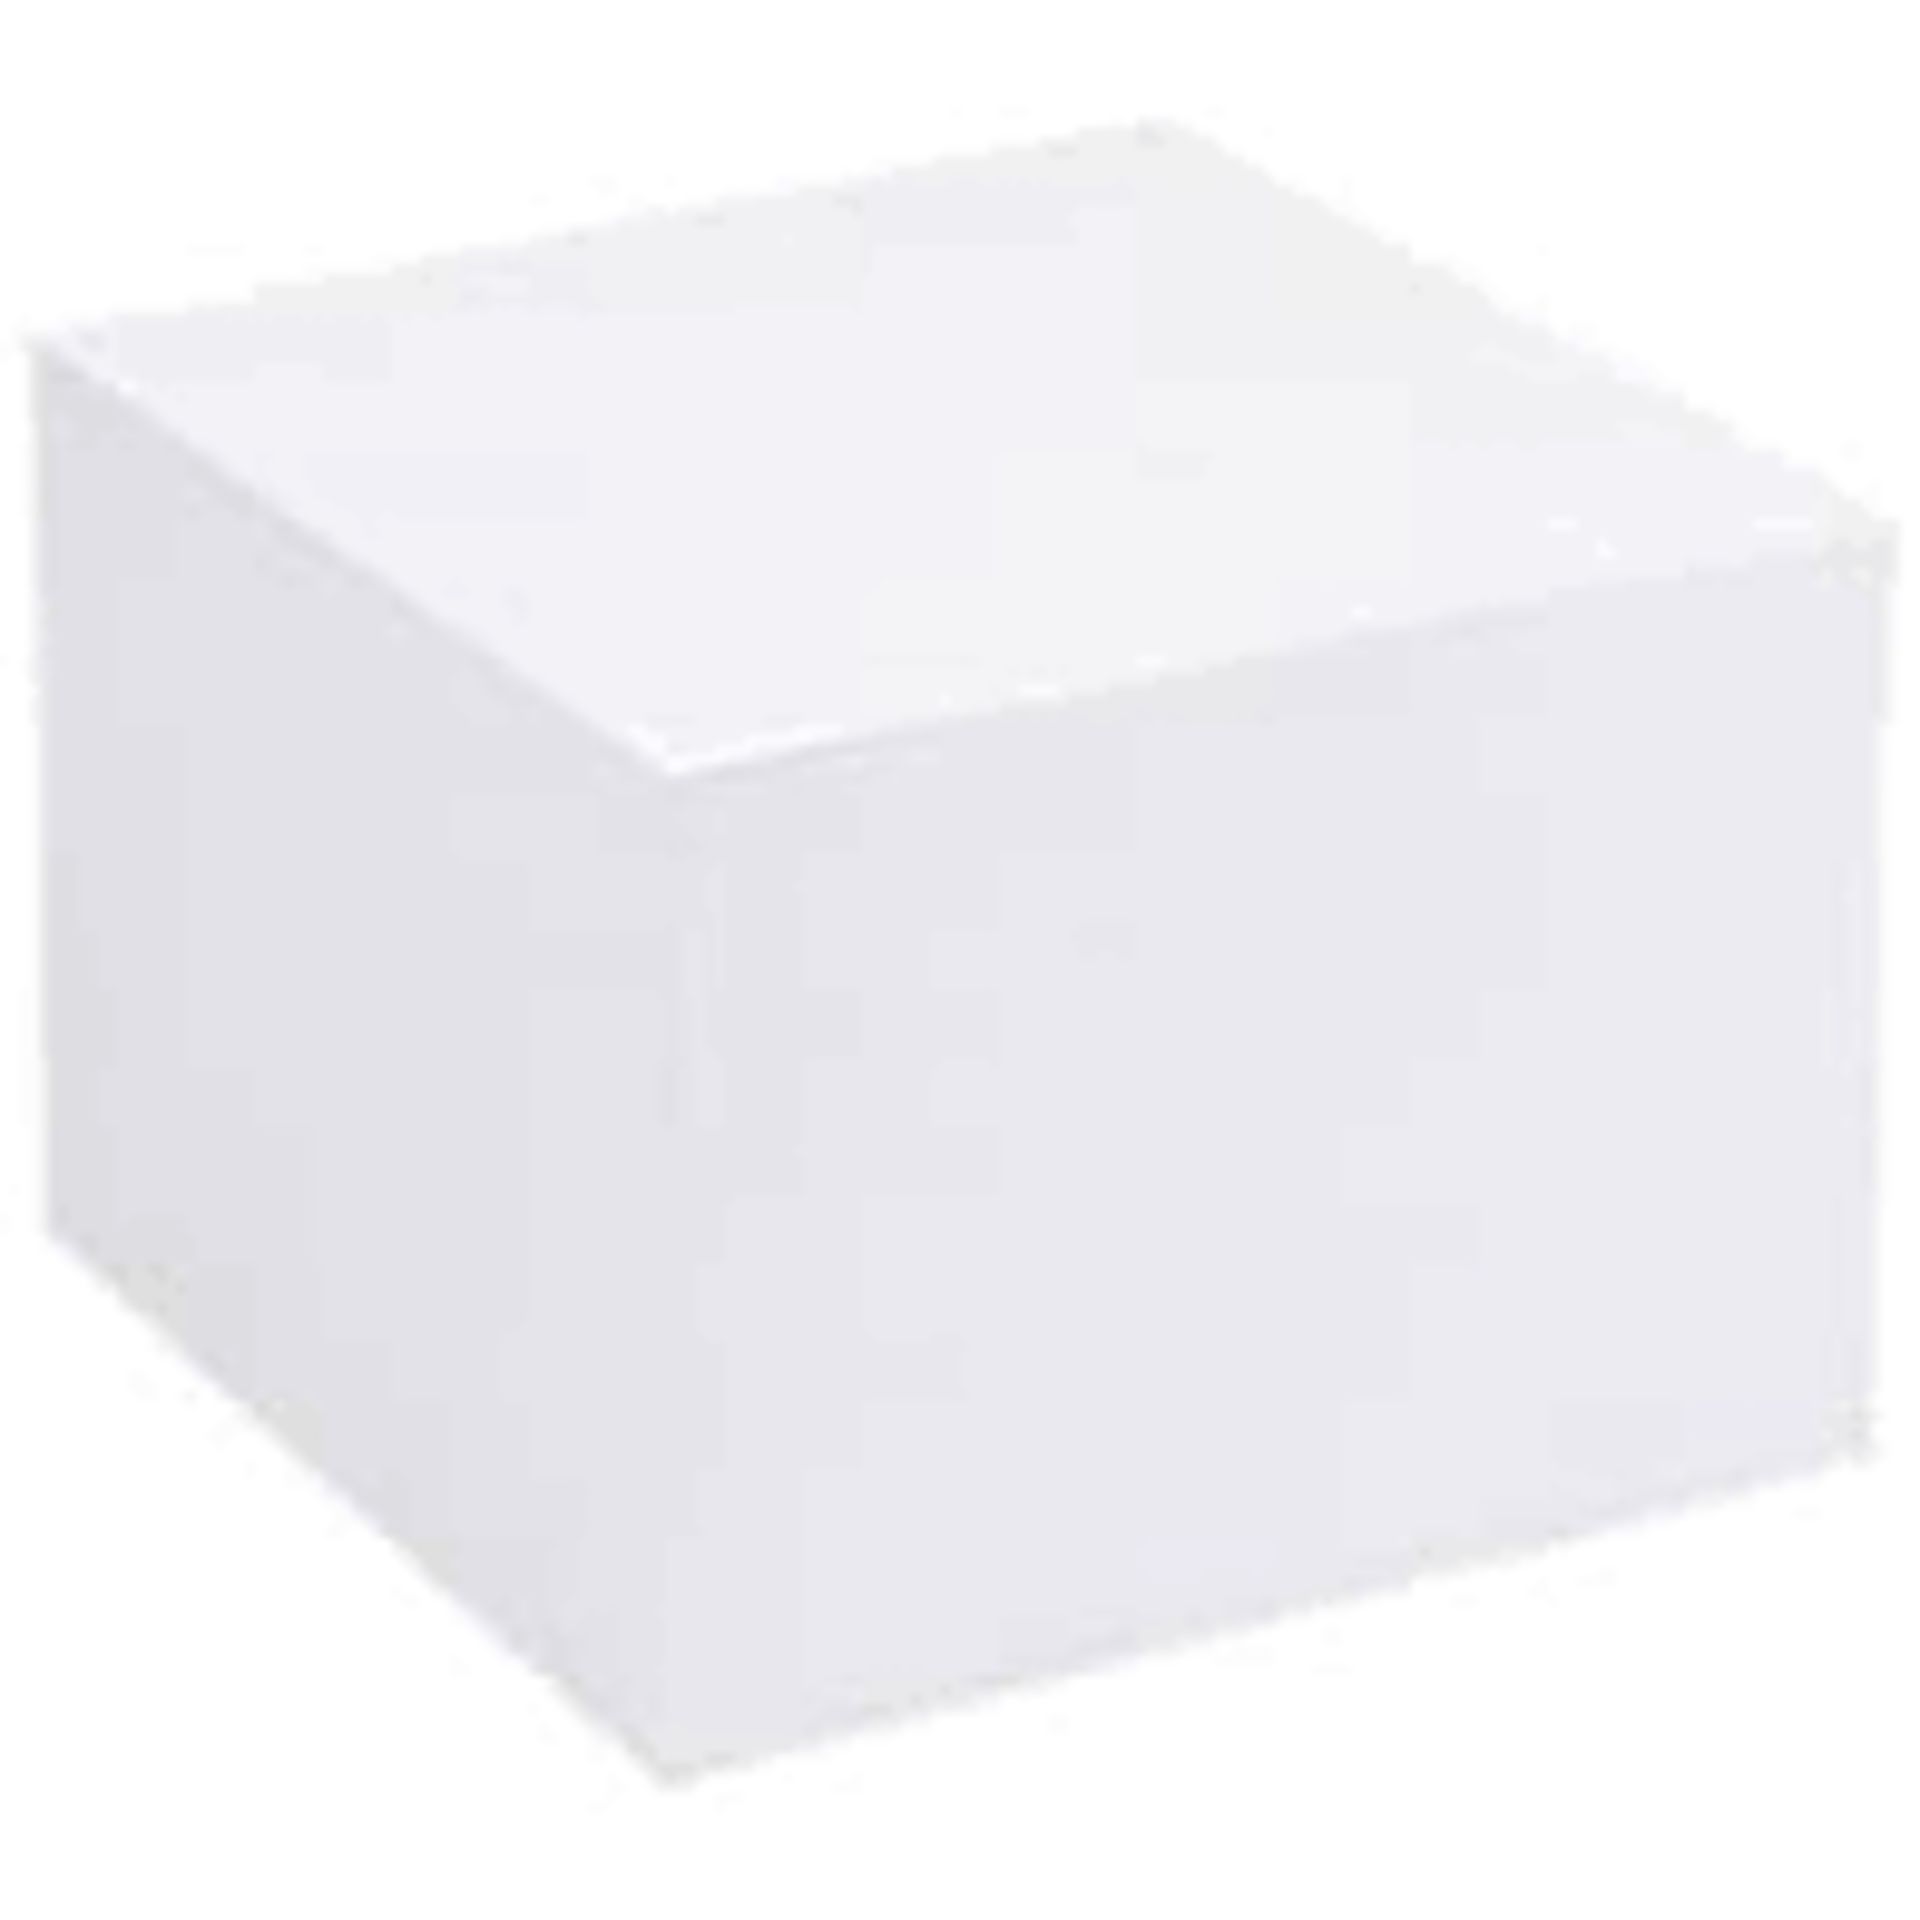 + VAT Grade A A Lot Of Three Clear Memo Blocks With 700 Sheets vWhite Paper & 3 Packs Of 700 Sheets